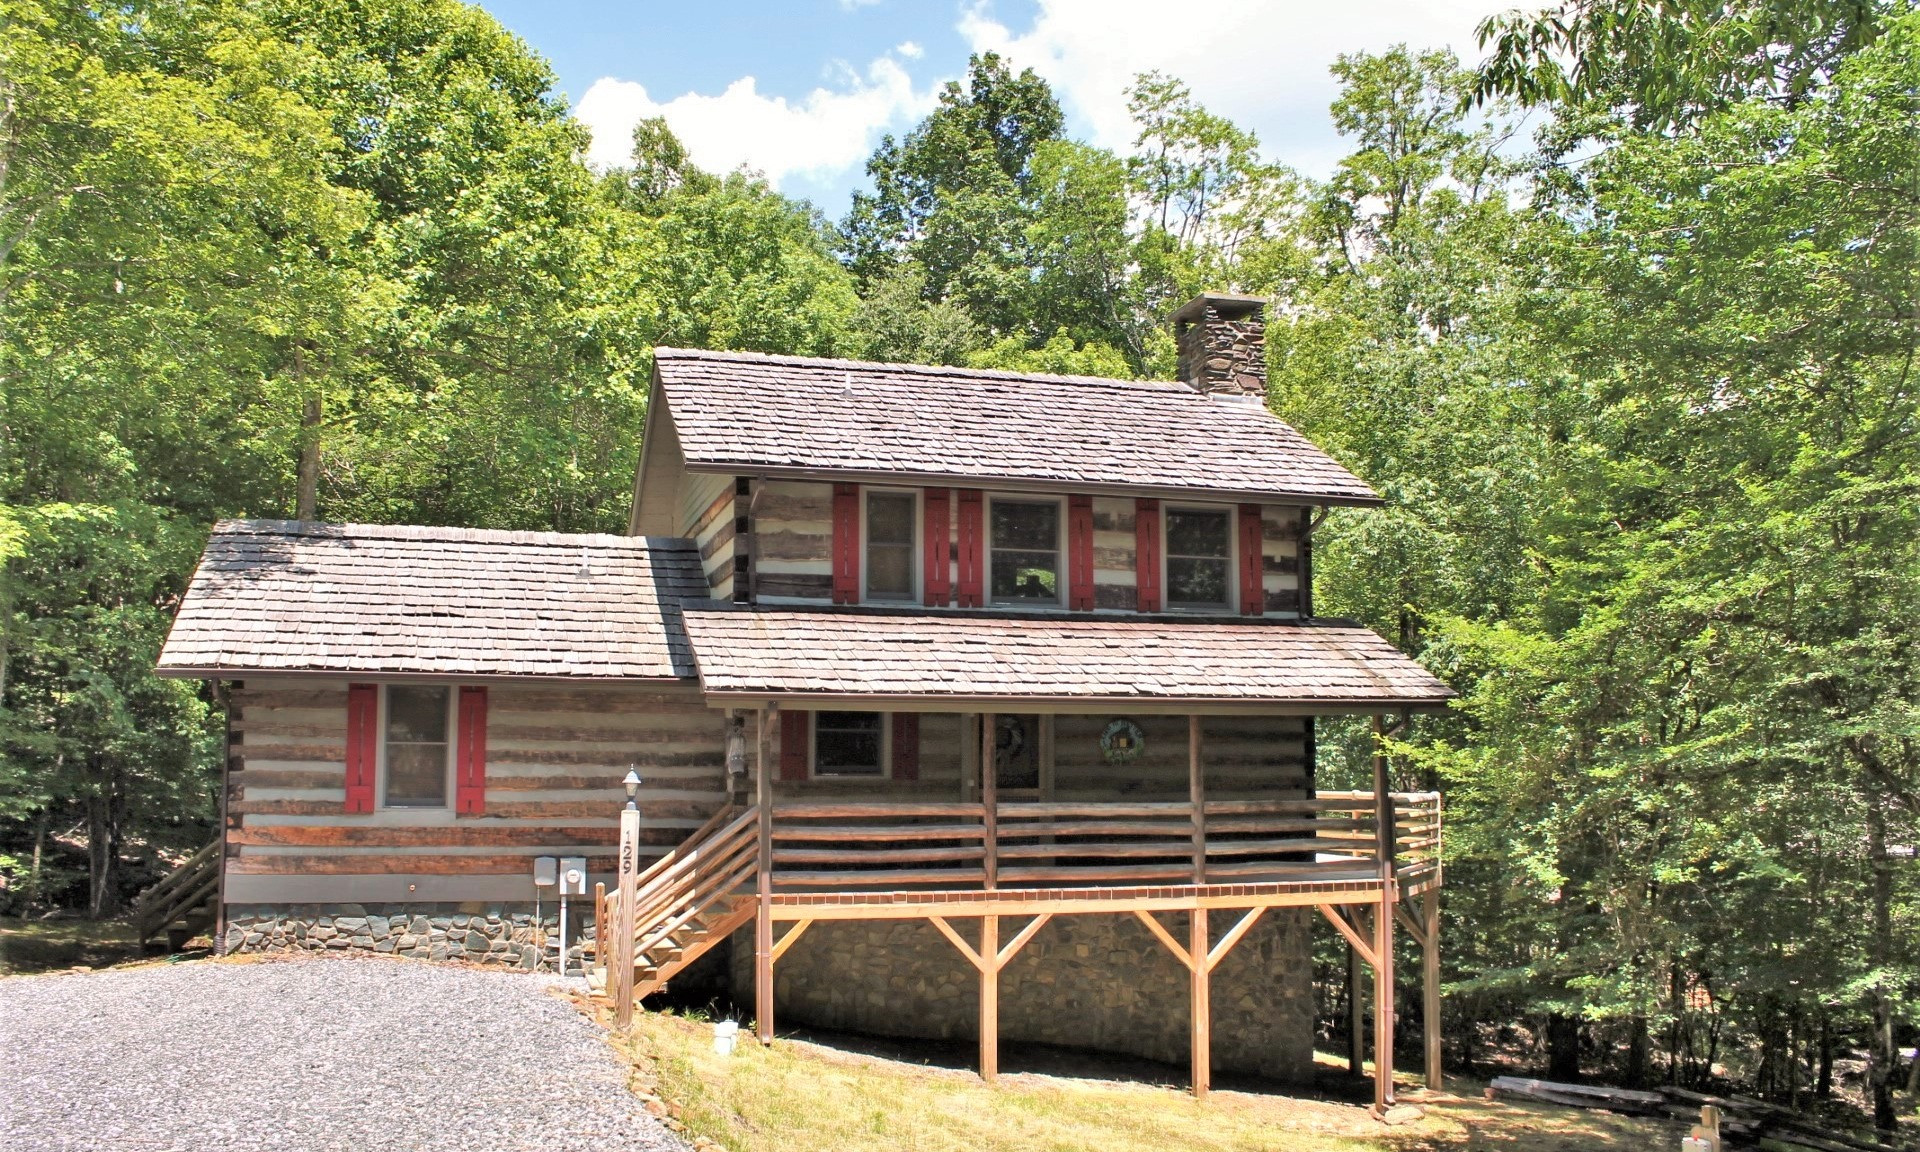 Offered at $325,000, this antique log home located in the Stonebridge  community in the Todd area of Southern Ashe County in the North Carolina Mountains will be a great choice for your mountain retreat or primary residence.  M137